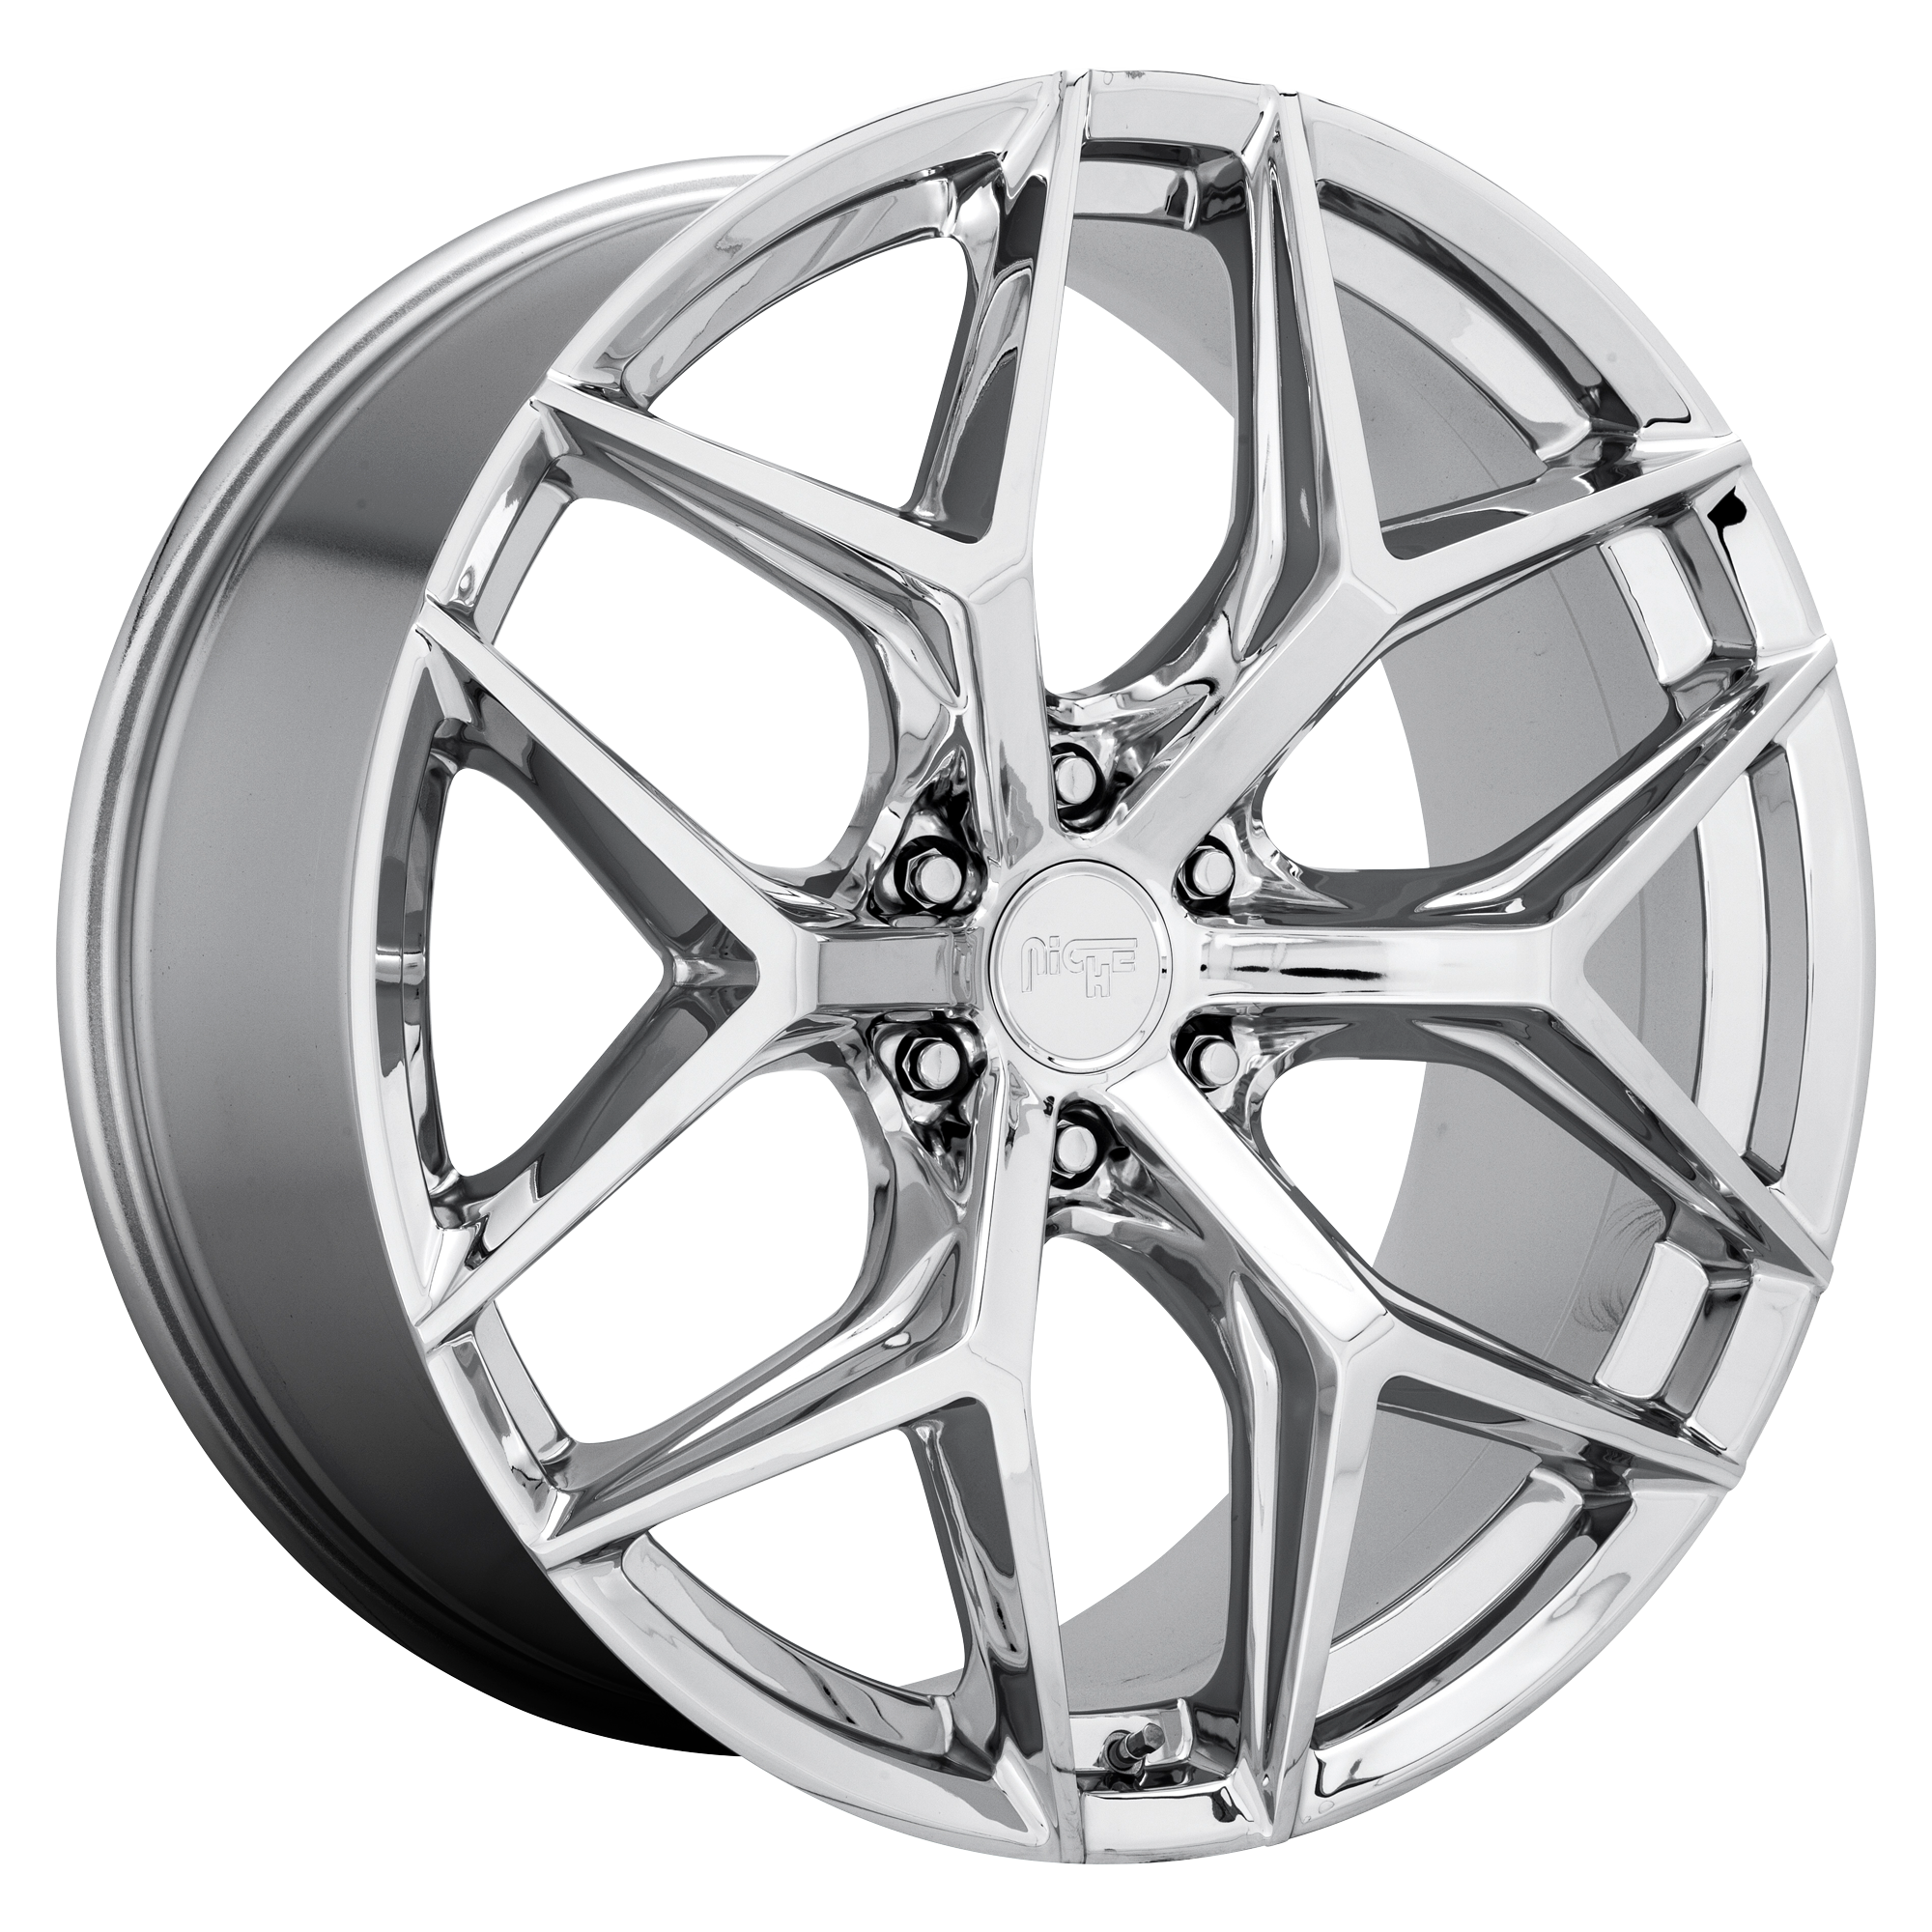 VICE SUV 24x10 6x135.00 CHROME PLATED (30 mm) - Tires and Engine Performance